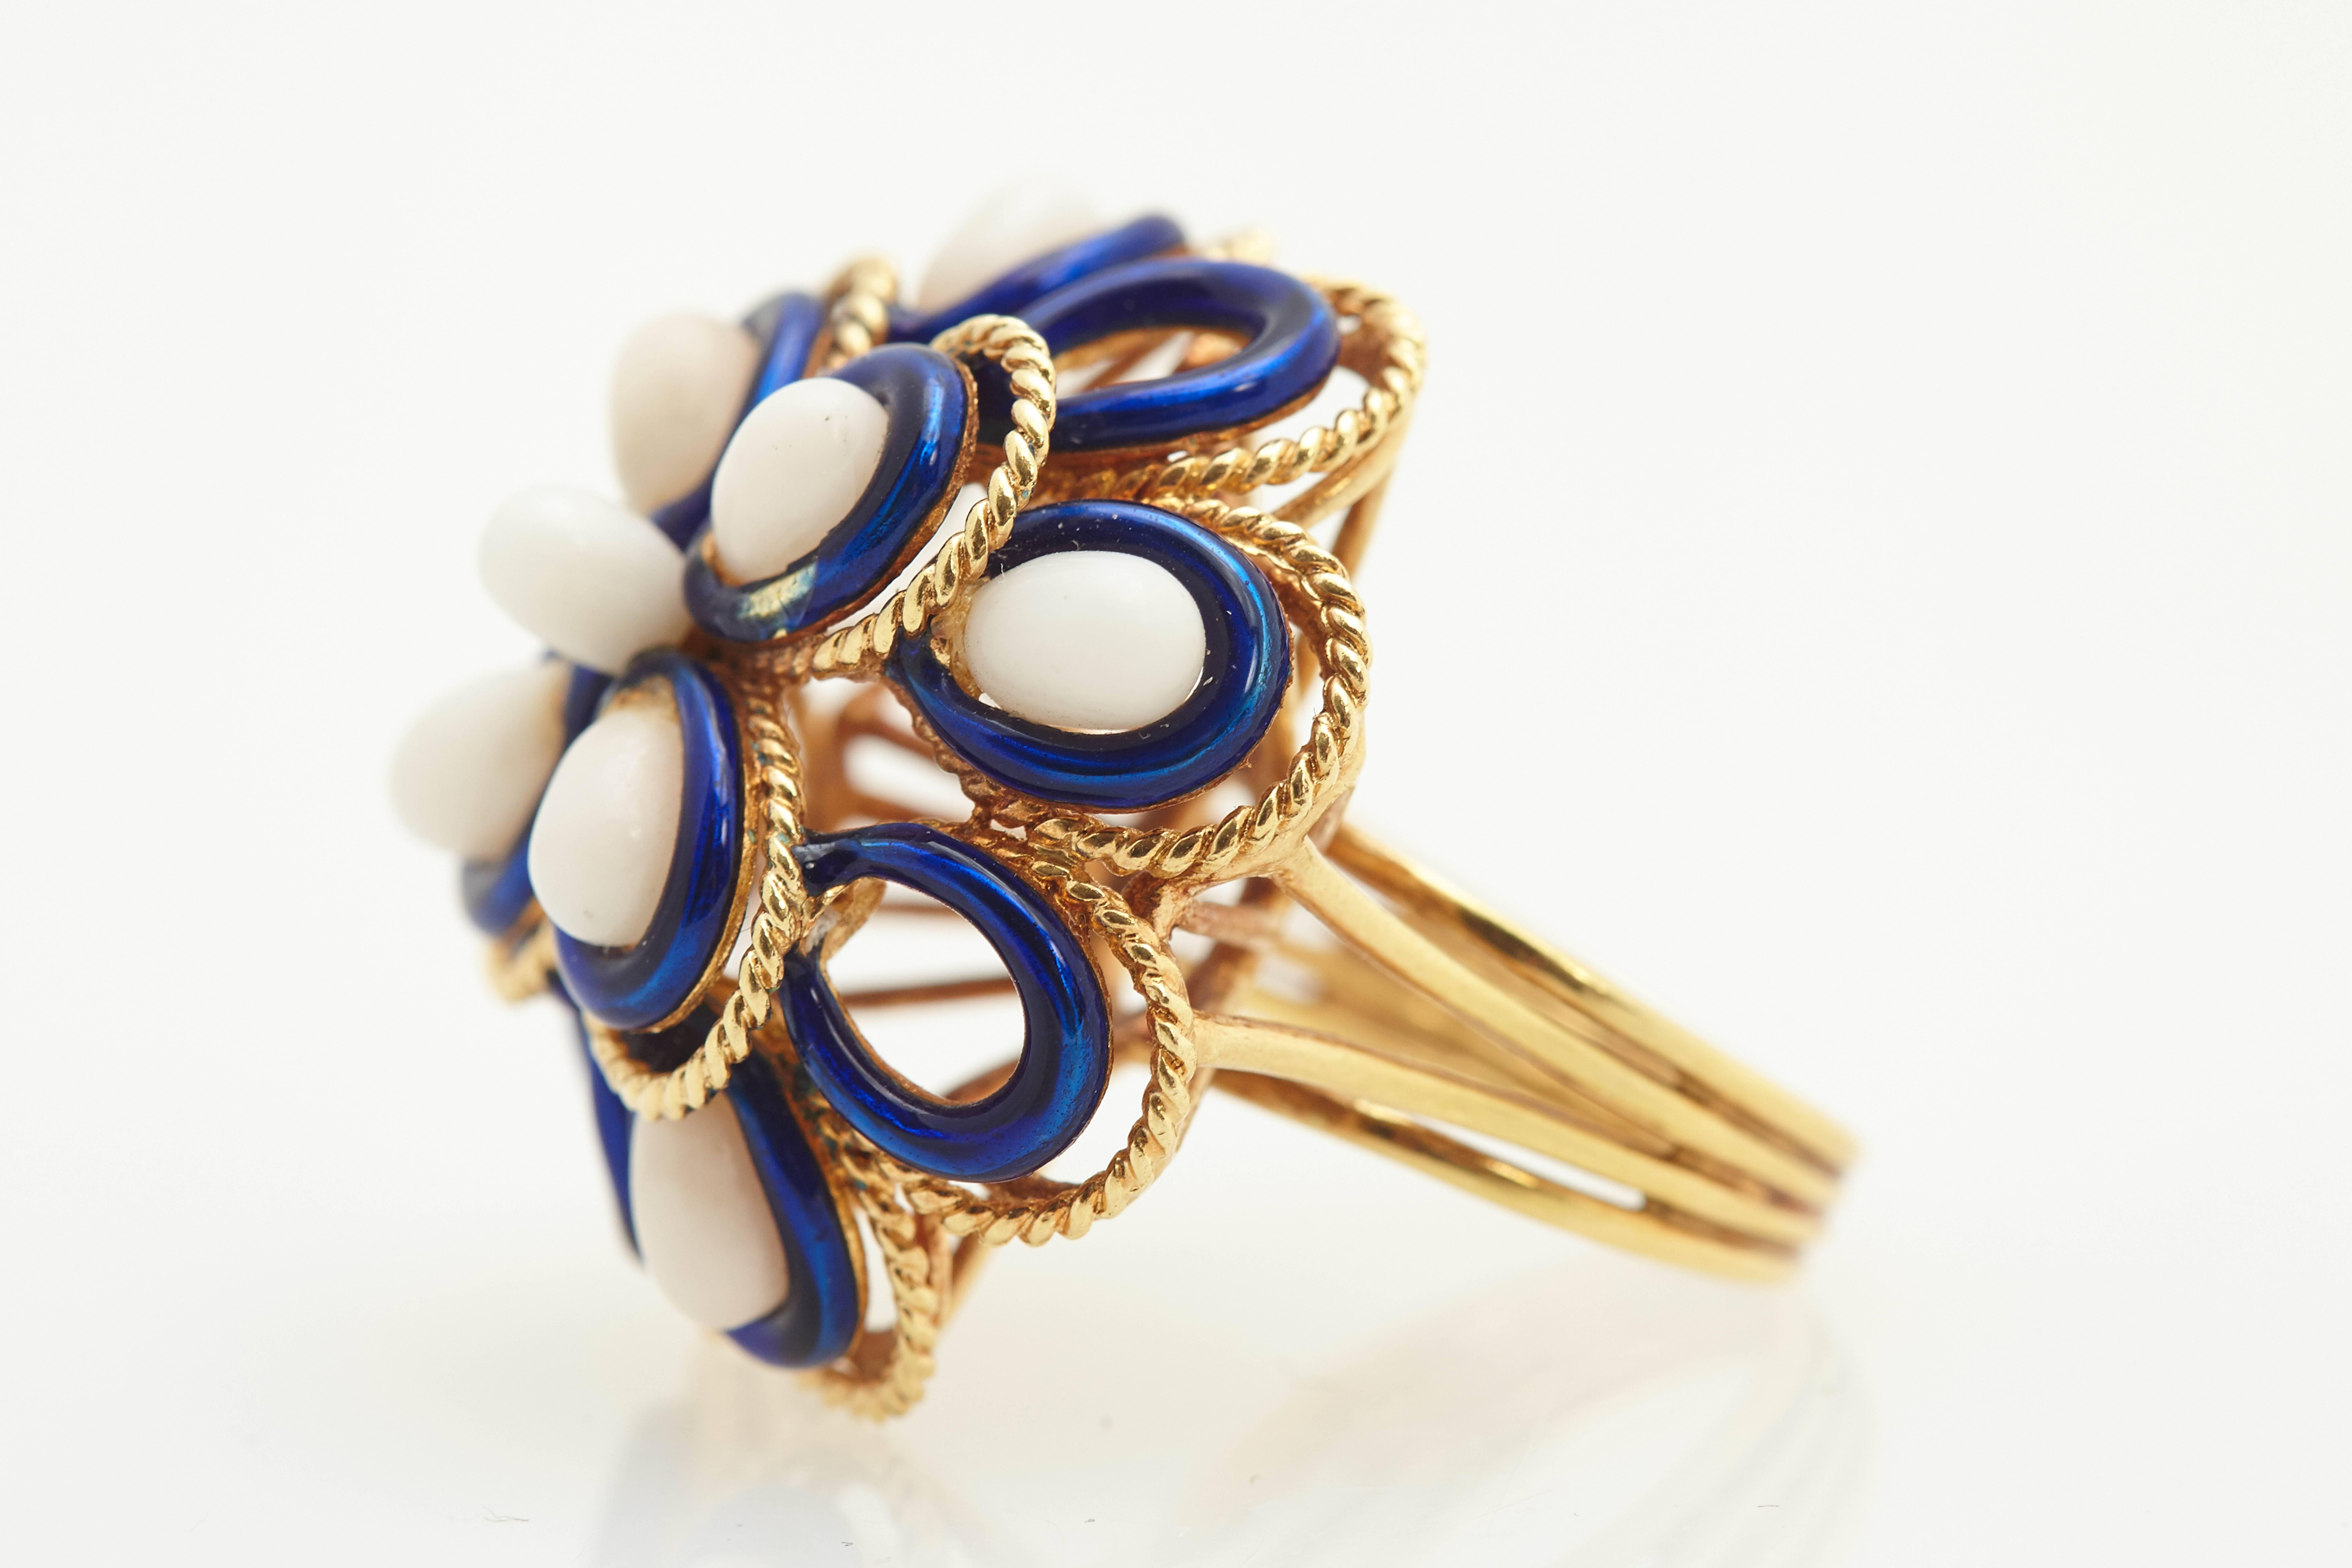 A chic blue enamel and white coral ring on 18kt yellow gold. Made in Italy, circa 1970 